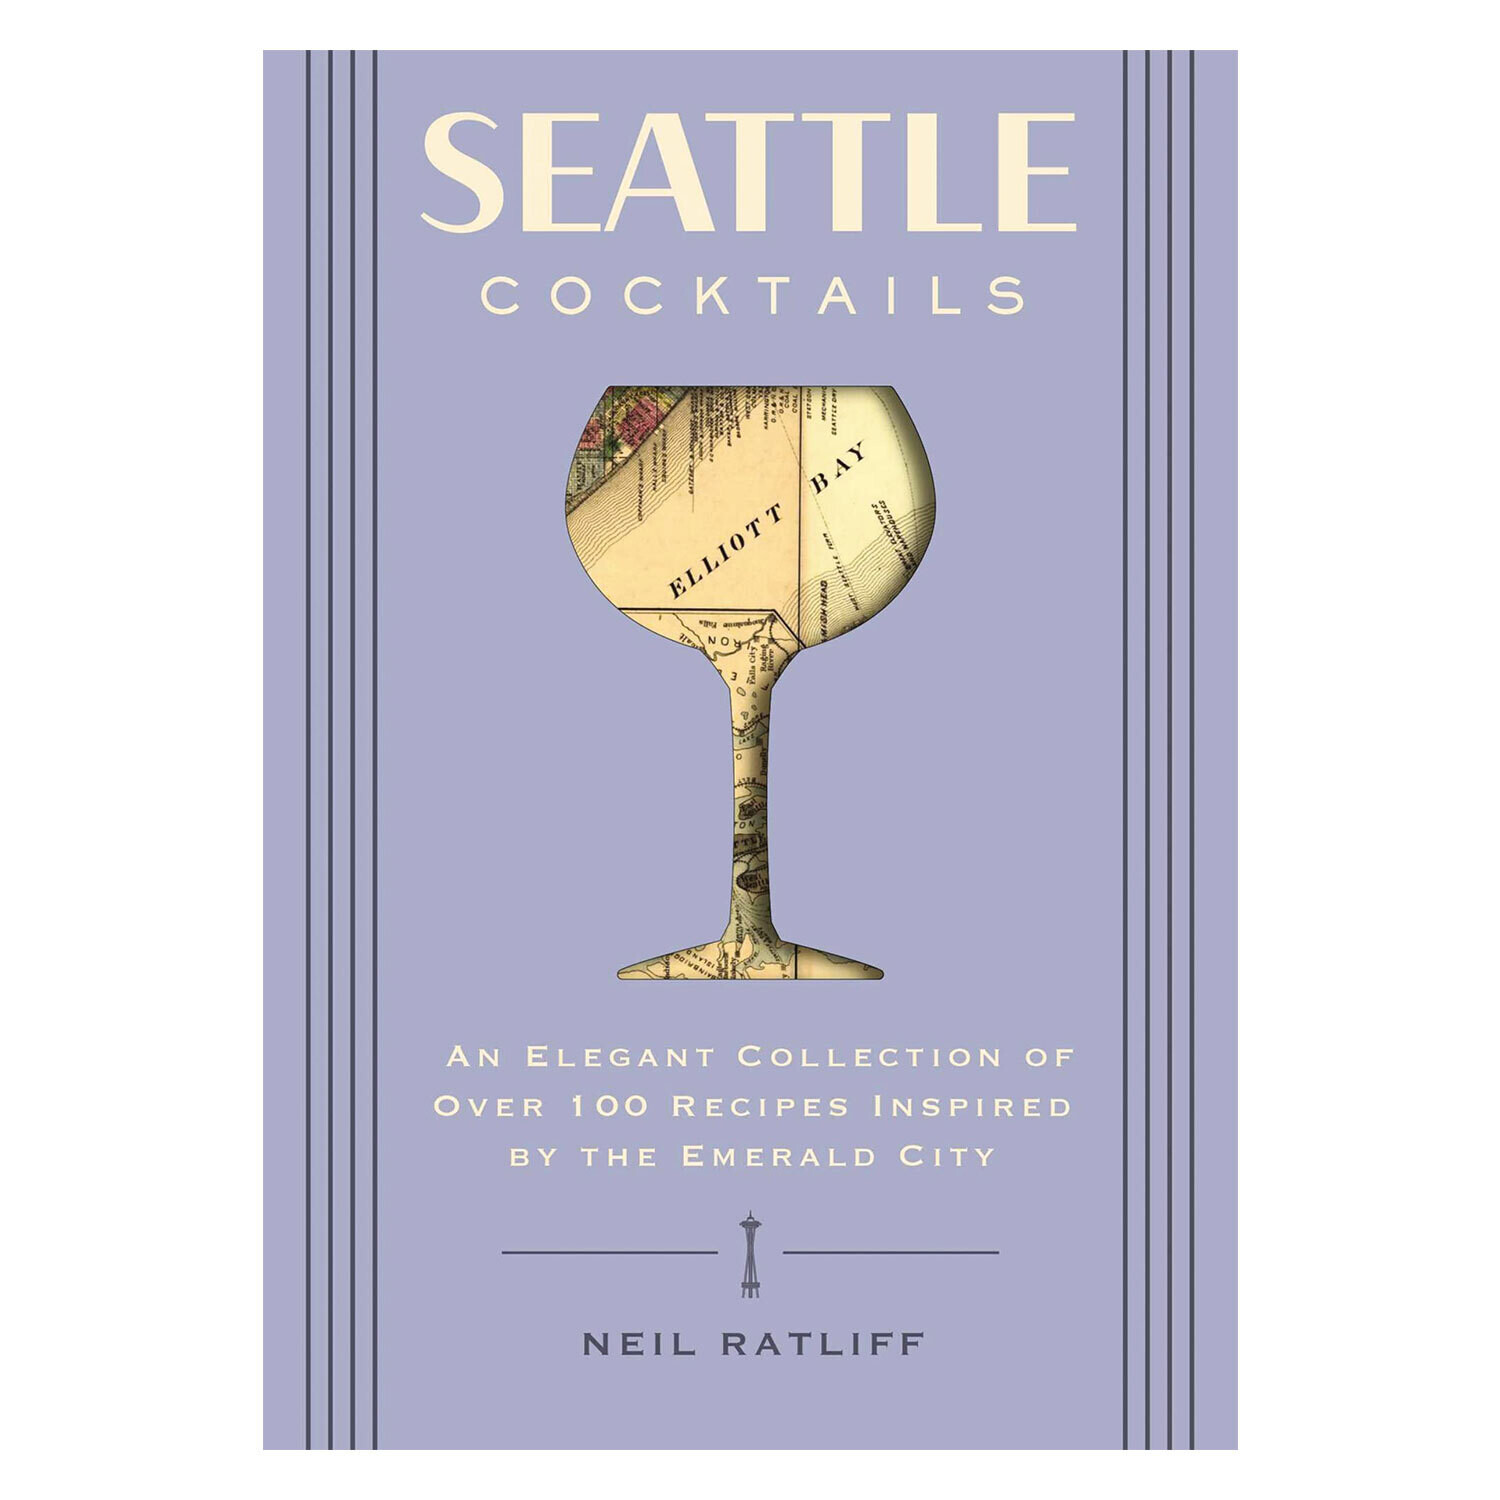 Seattle Cocktails: An Elegant Collection of Over 100 Recipes Inspired by The Emerald City